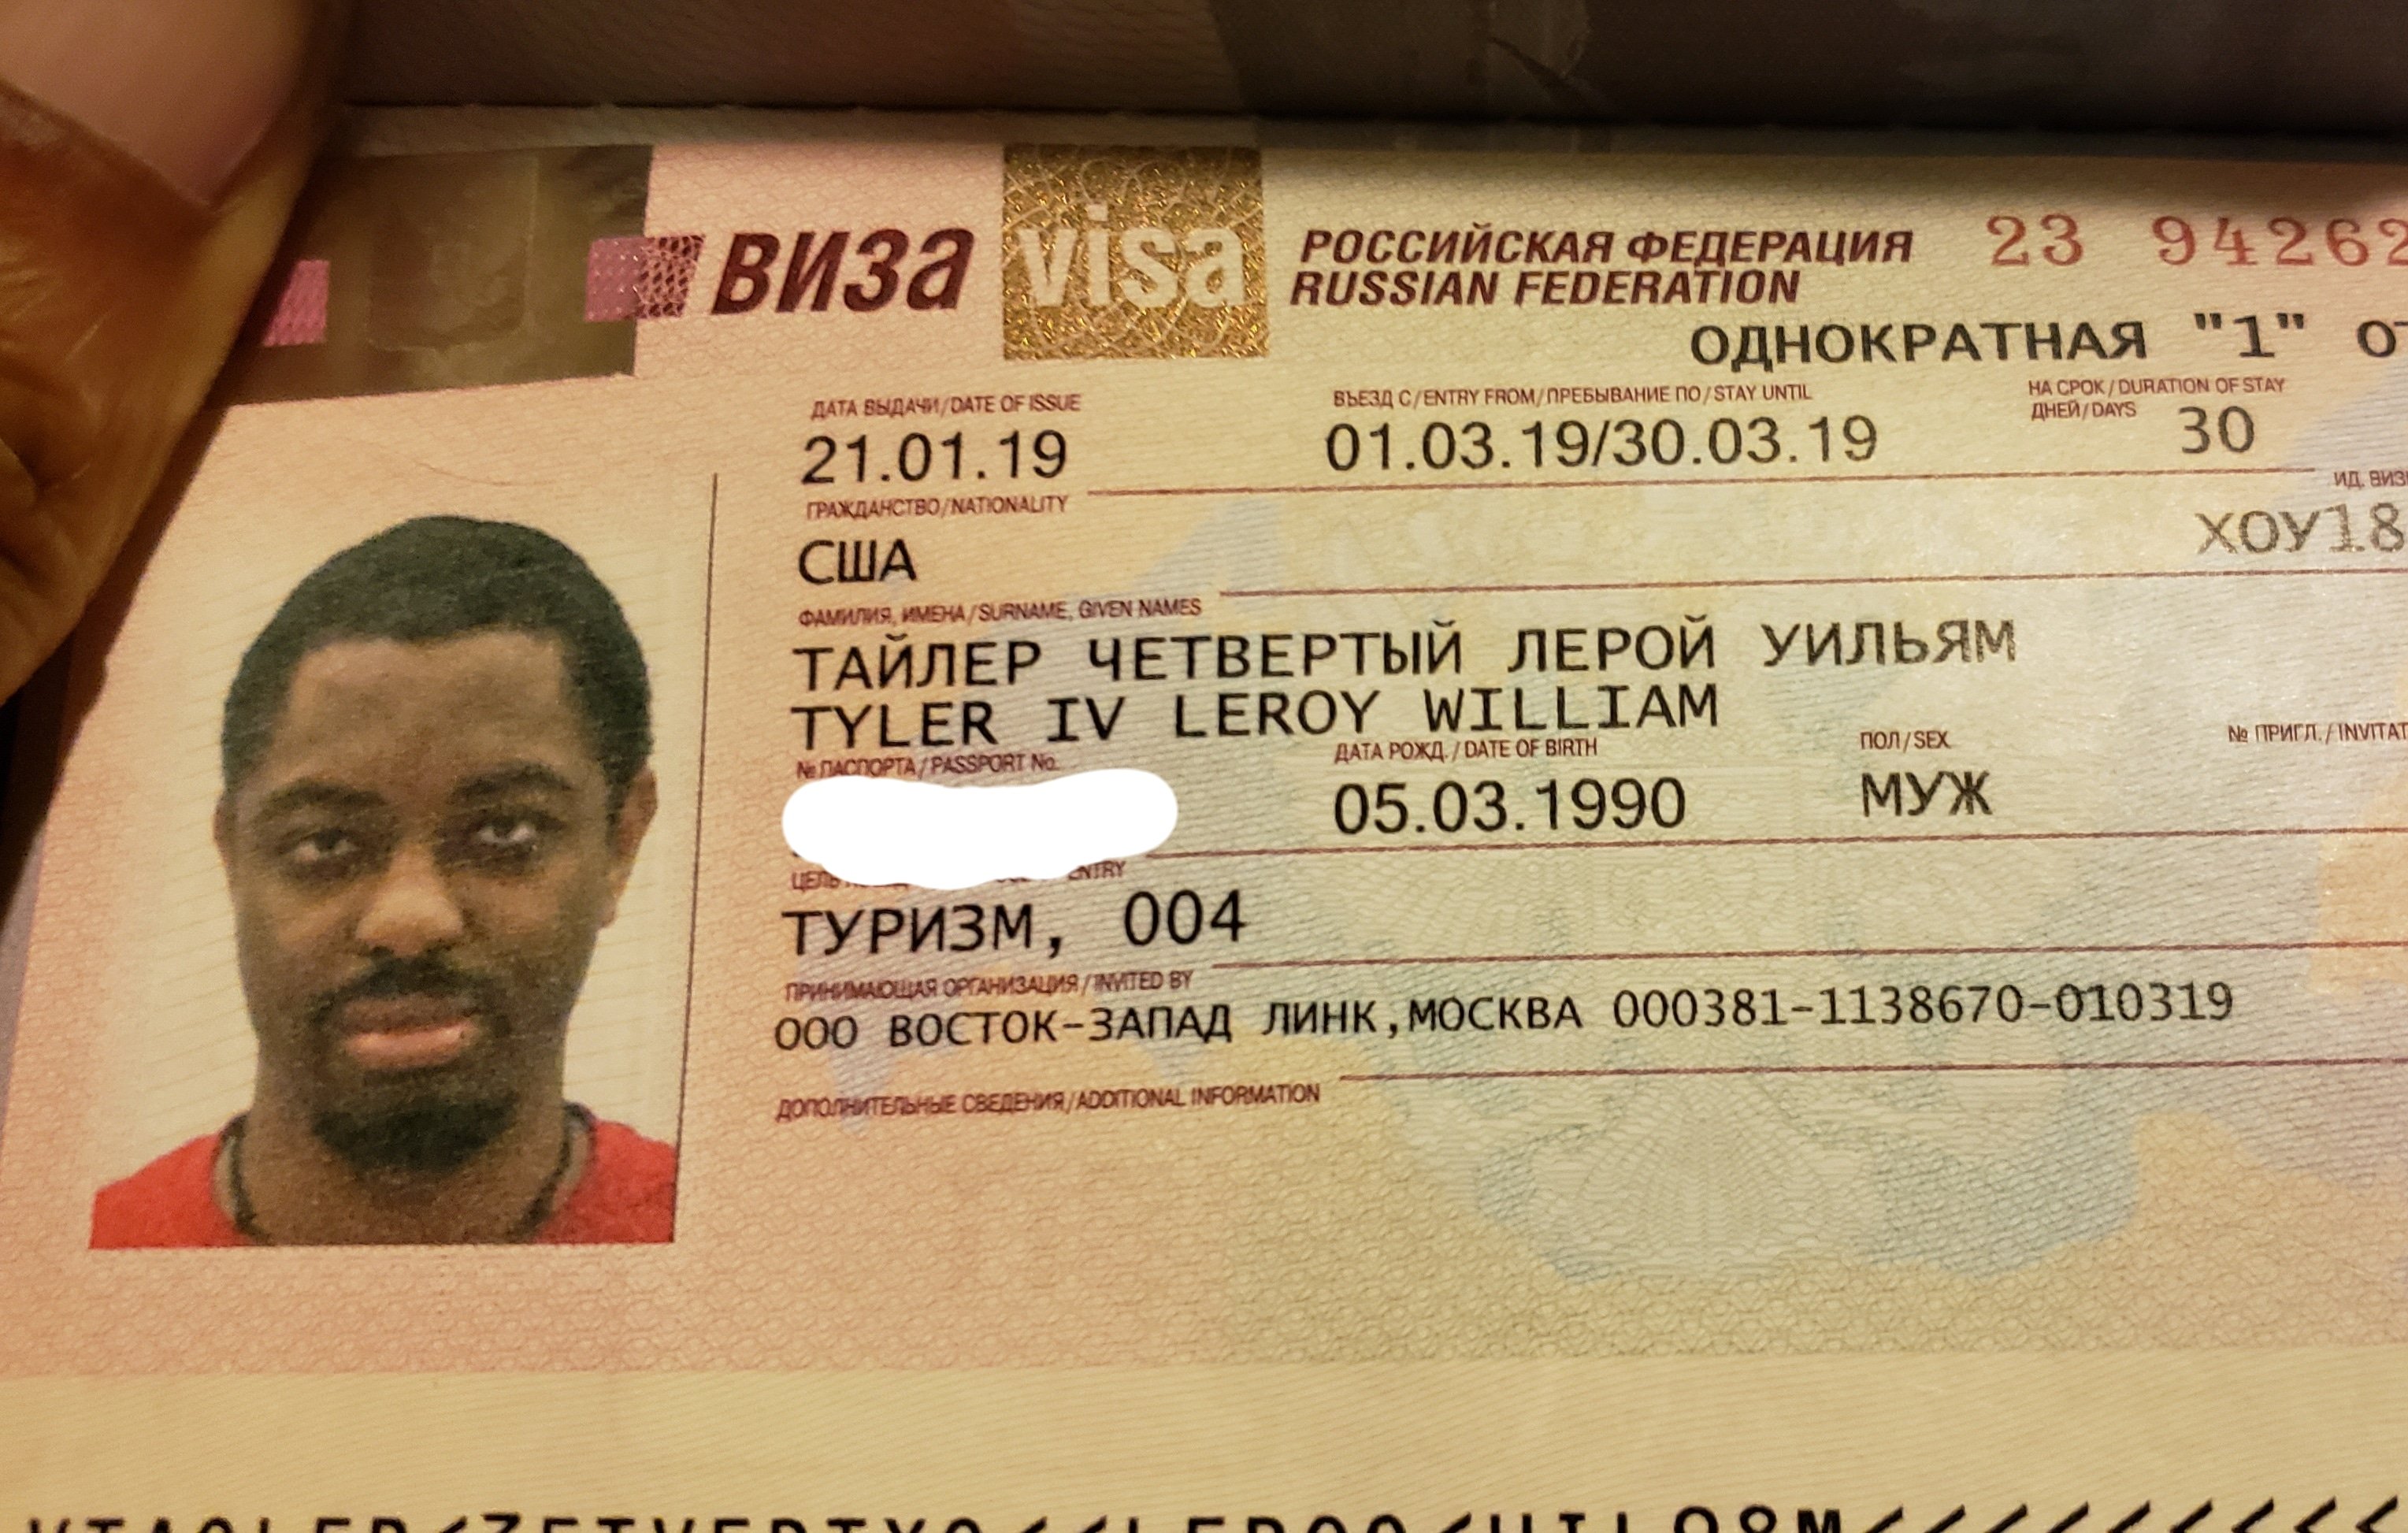 requirements for visit visa in russia